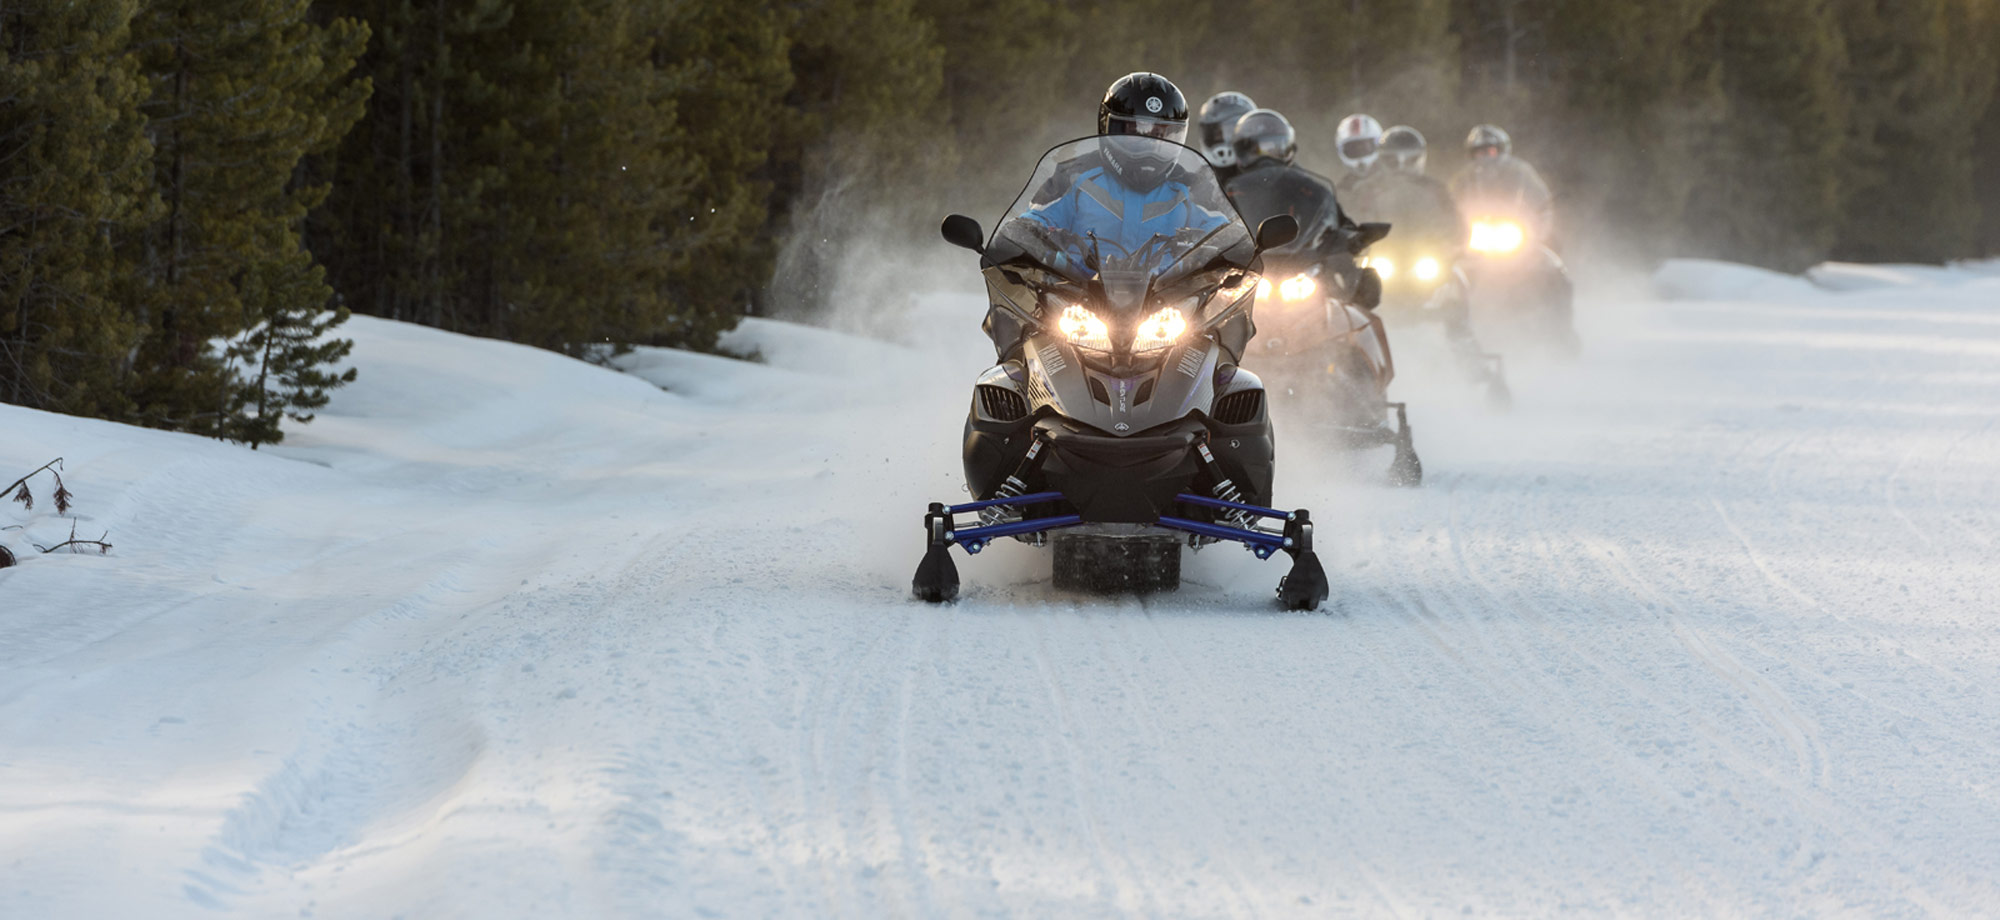 Snowmobilers riding in formation along trail